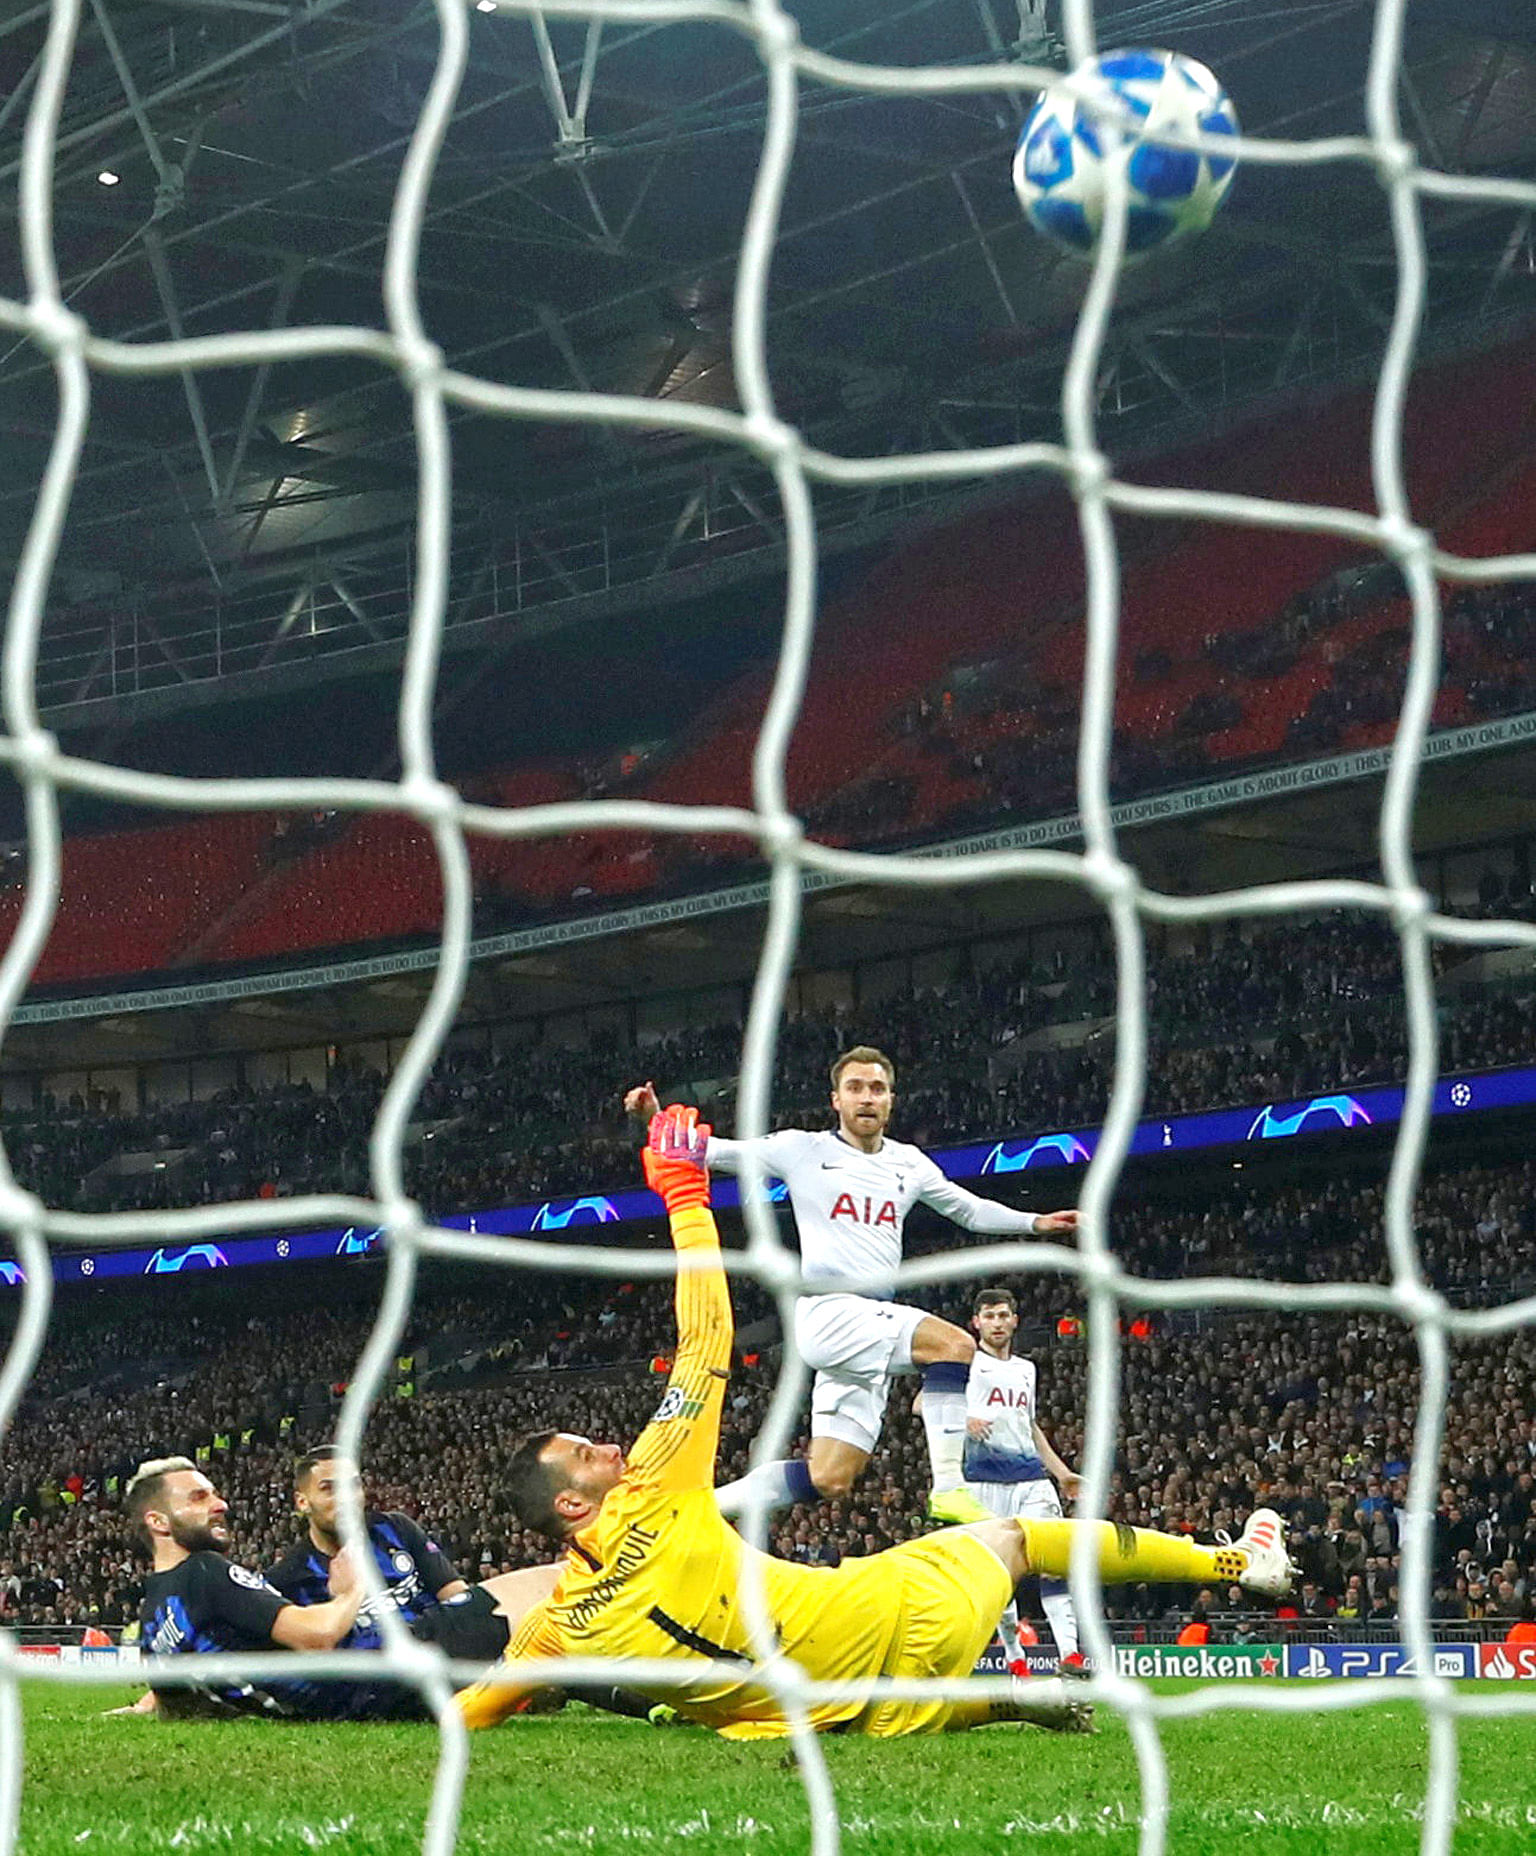 Tottenham's Christian Eriksen came off the bench to score the winner against Inter Milan and keep the English side's hopes of progressing to the knockout stages of the Champions League alive. Spurs face Barcelona in their final group game knowing any